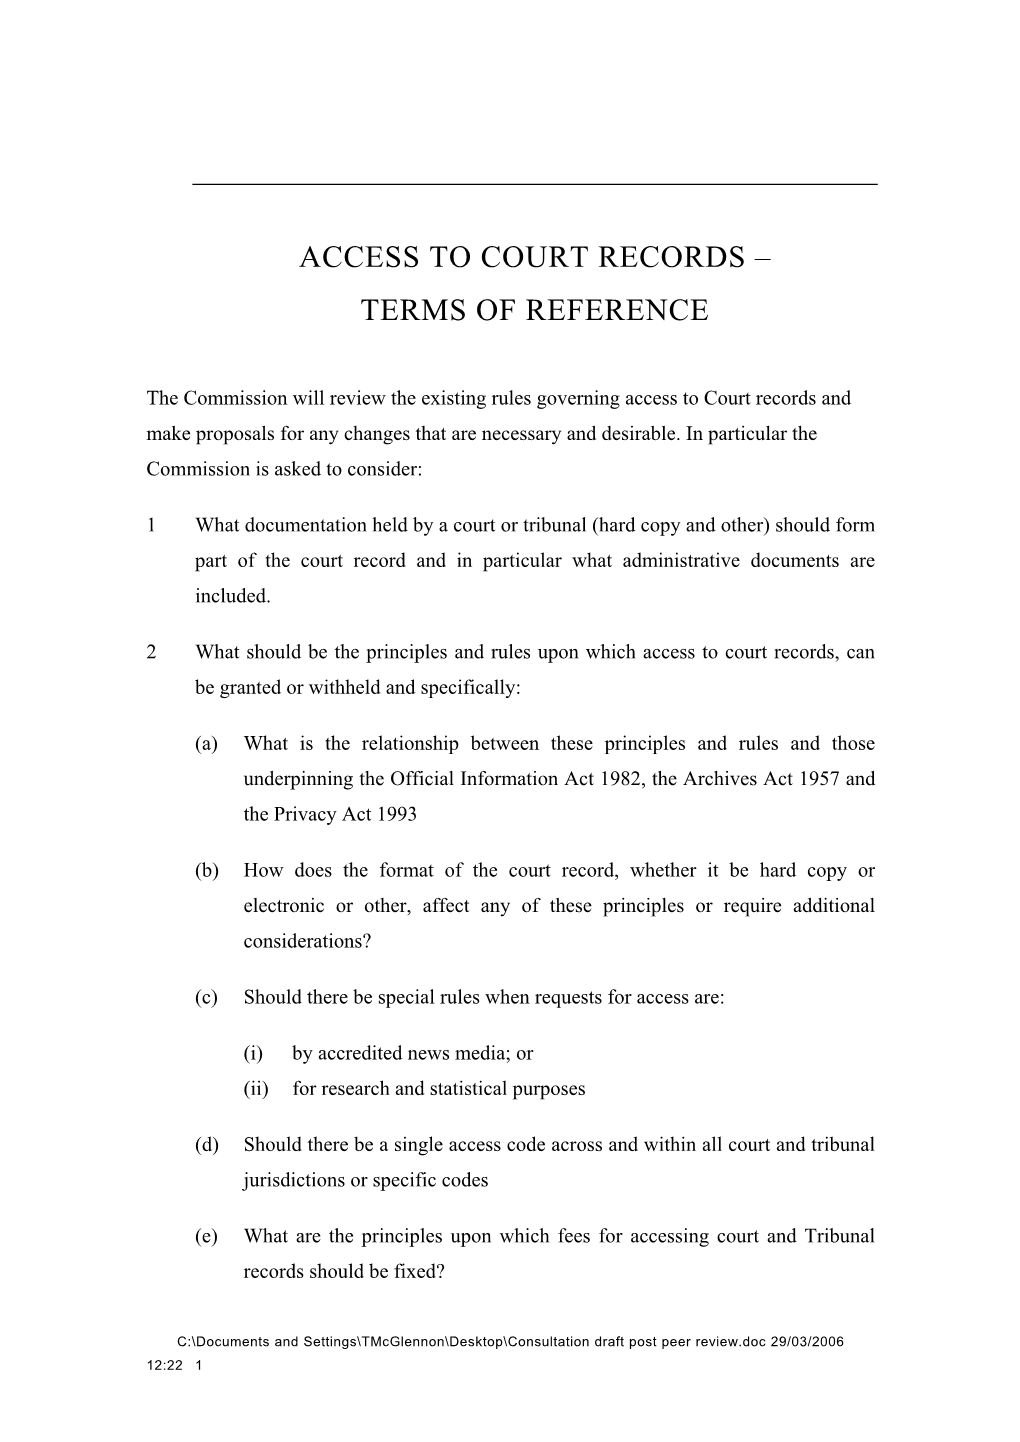 Access to Court Records – Terms of Reference